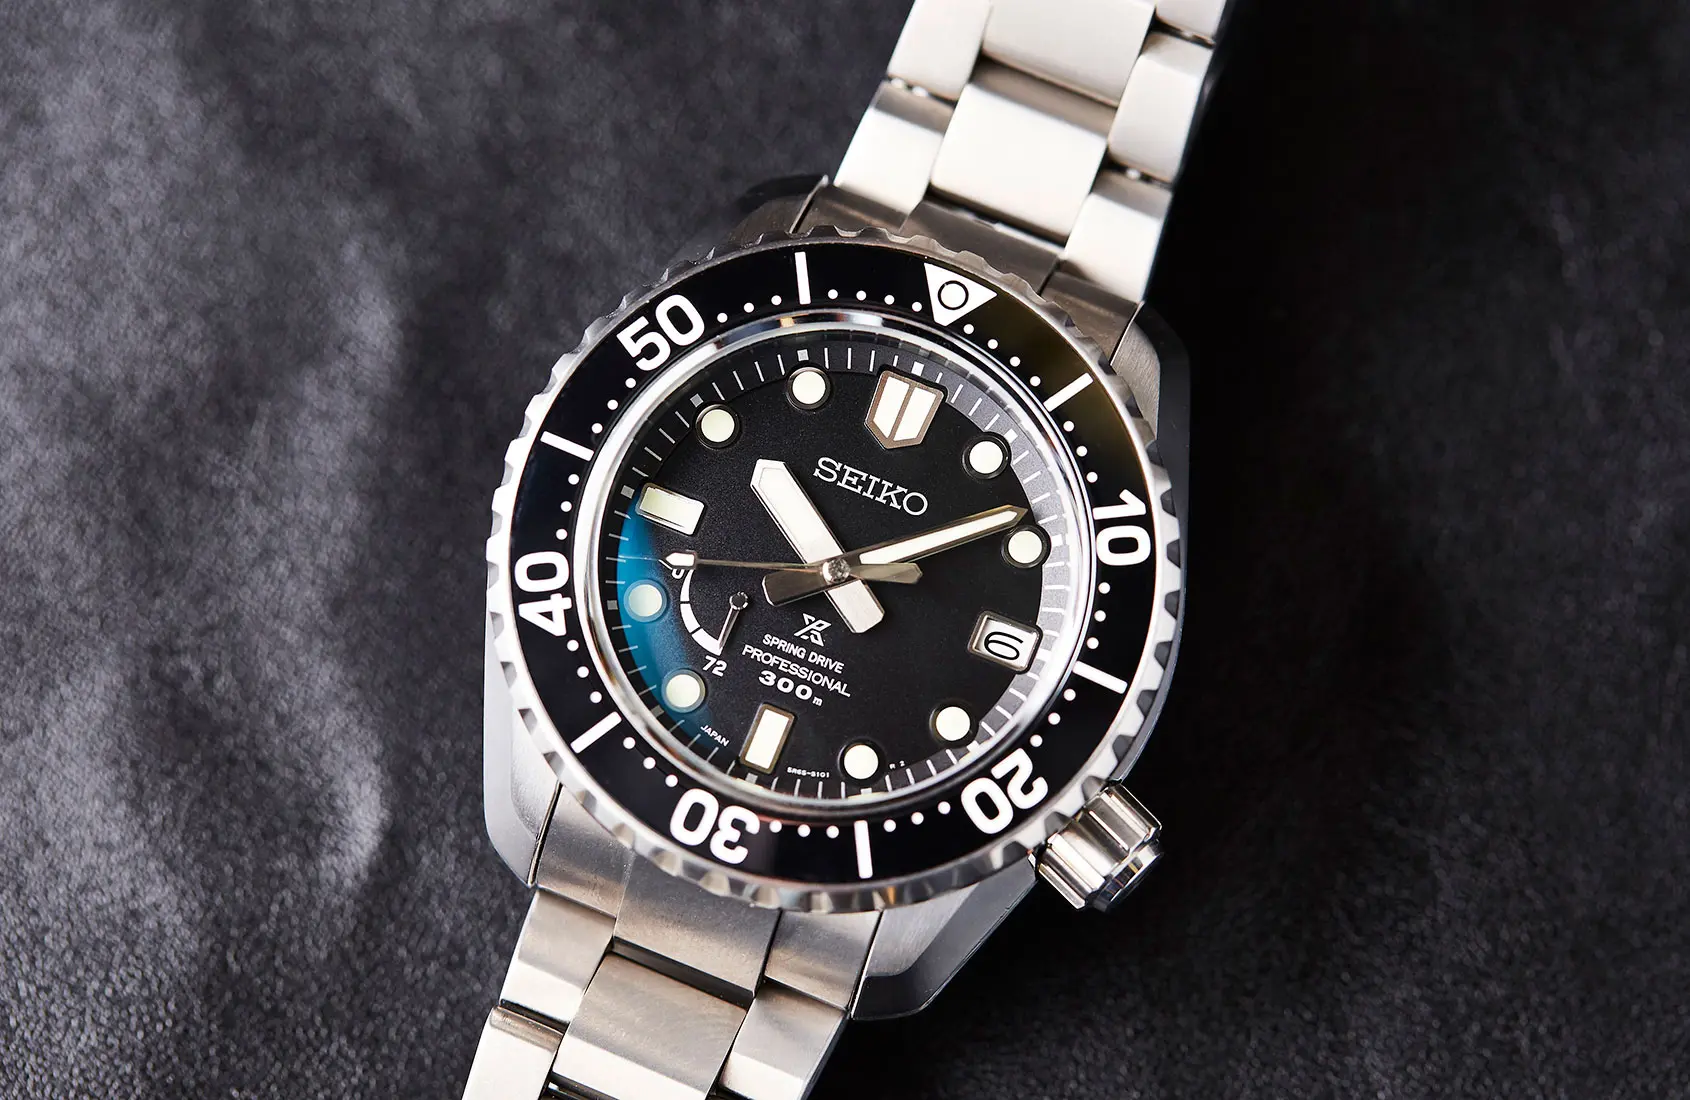 Seiko's Prospex LX Line Diver emerges from GPHG as a winner